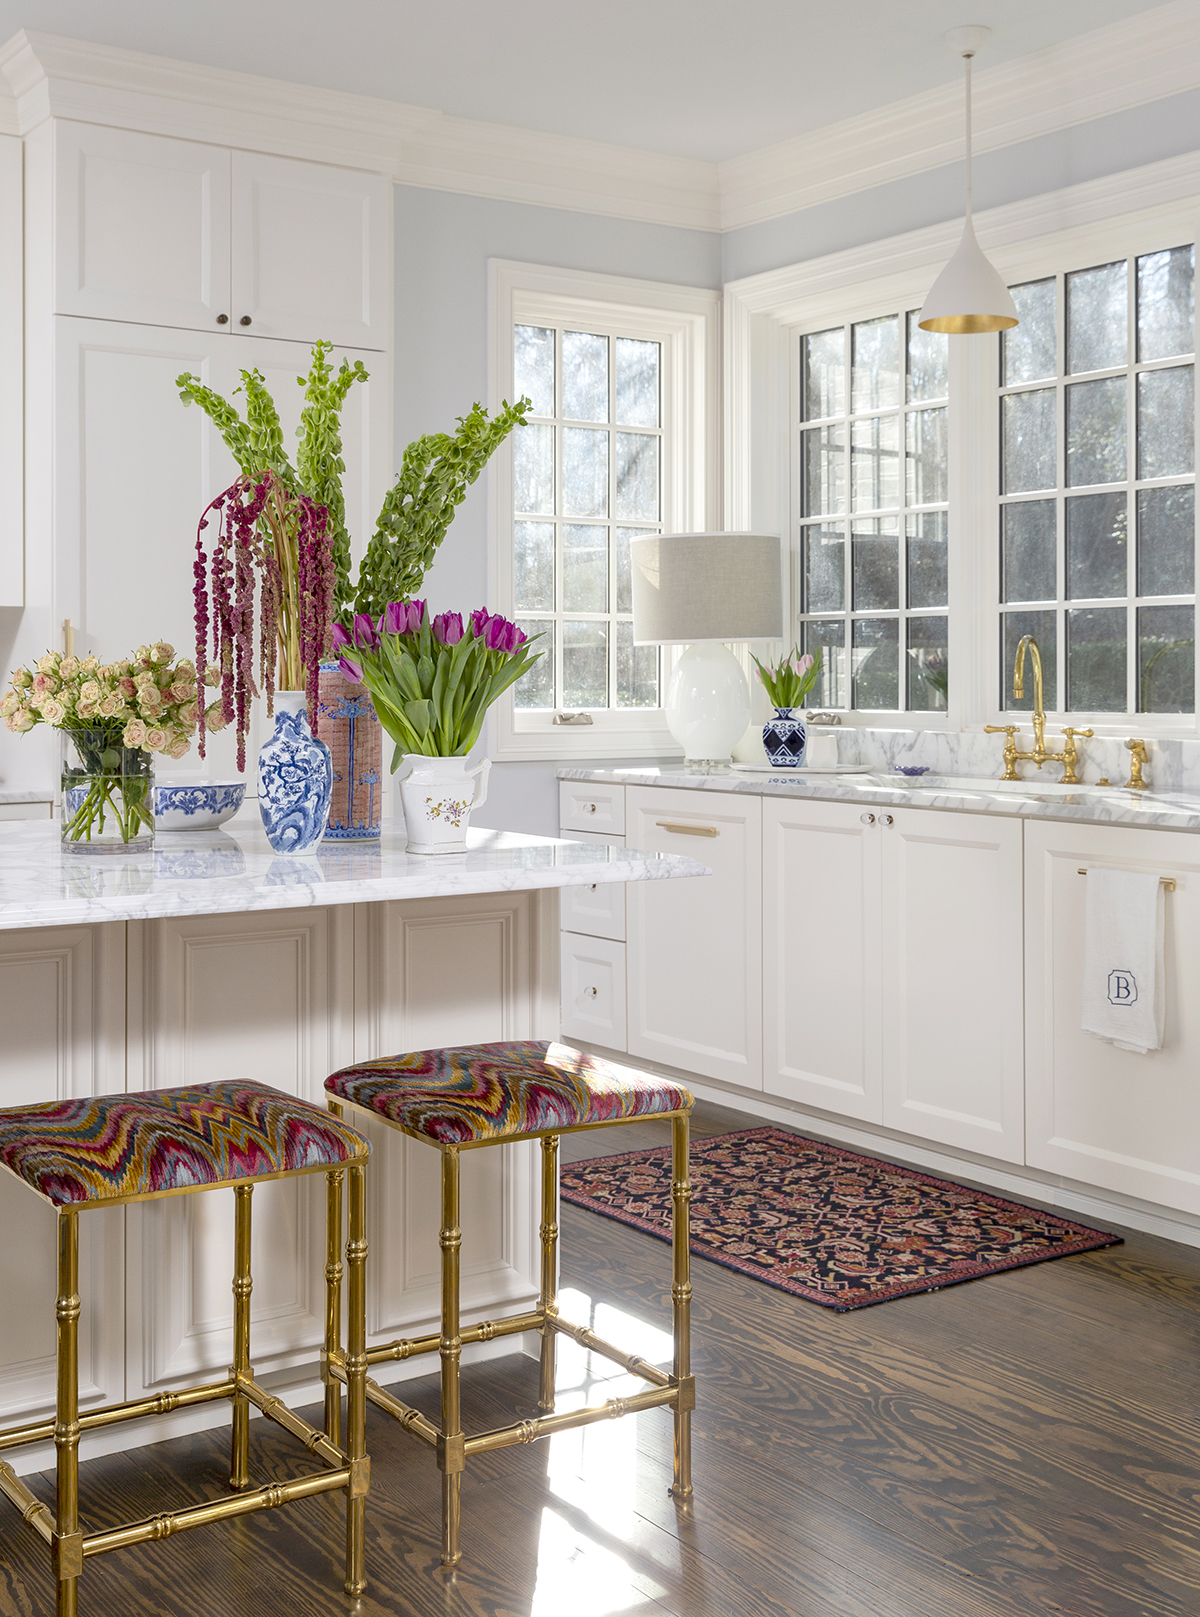 Interior photography of a white kitchen with gold stools, colorful fabric and flowers and a rug in a home in Fayetteville, Arkansas.